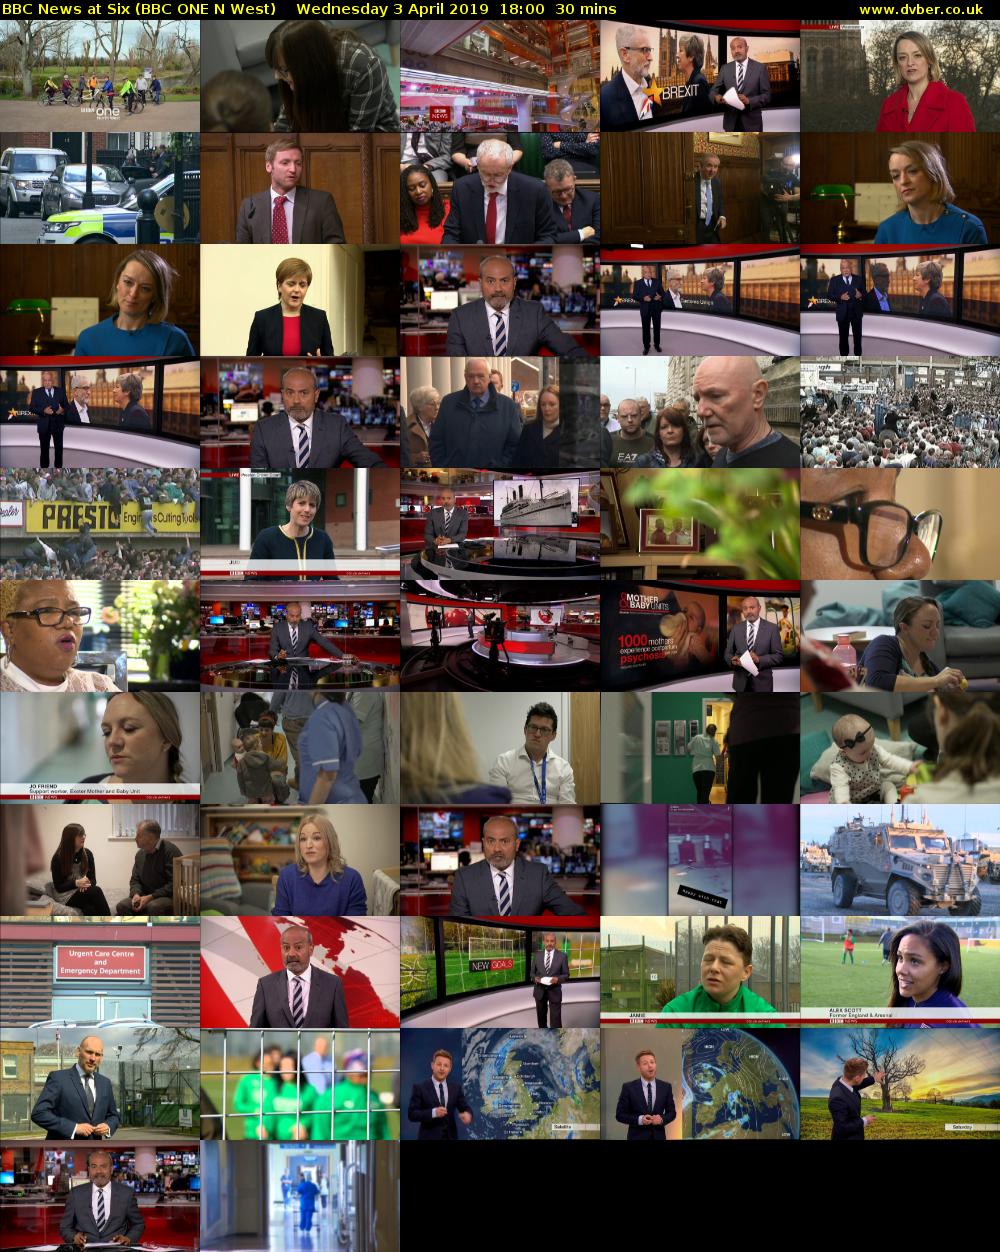 BBC News at Six (BBC ONE N West) Wednesday 3 April 2019 18:00 - 18:30